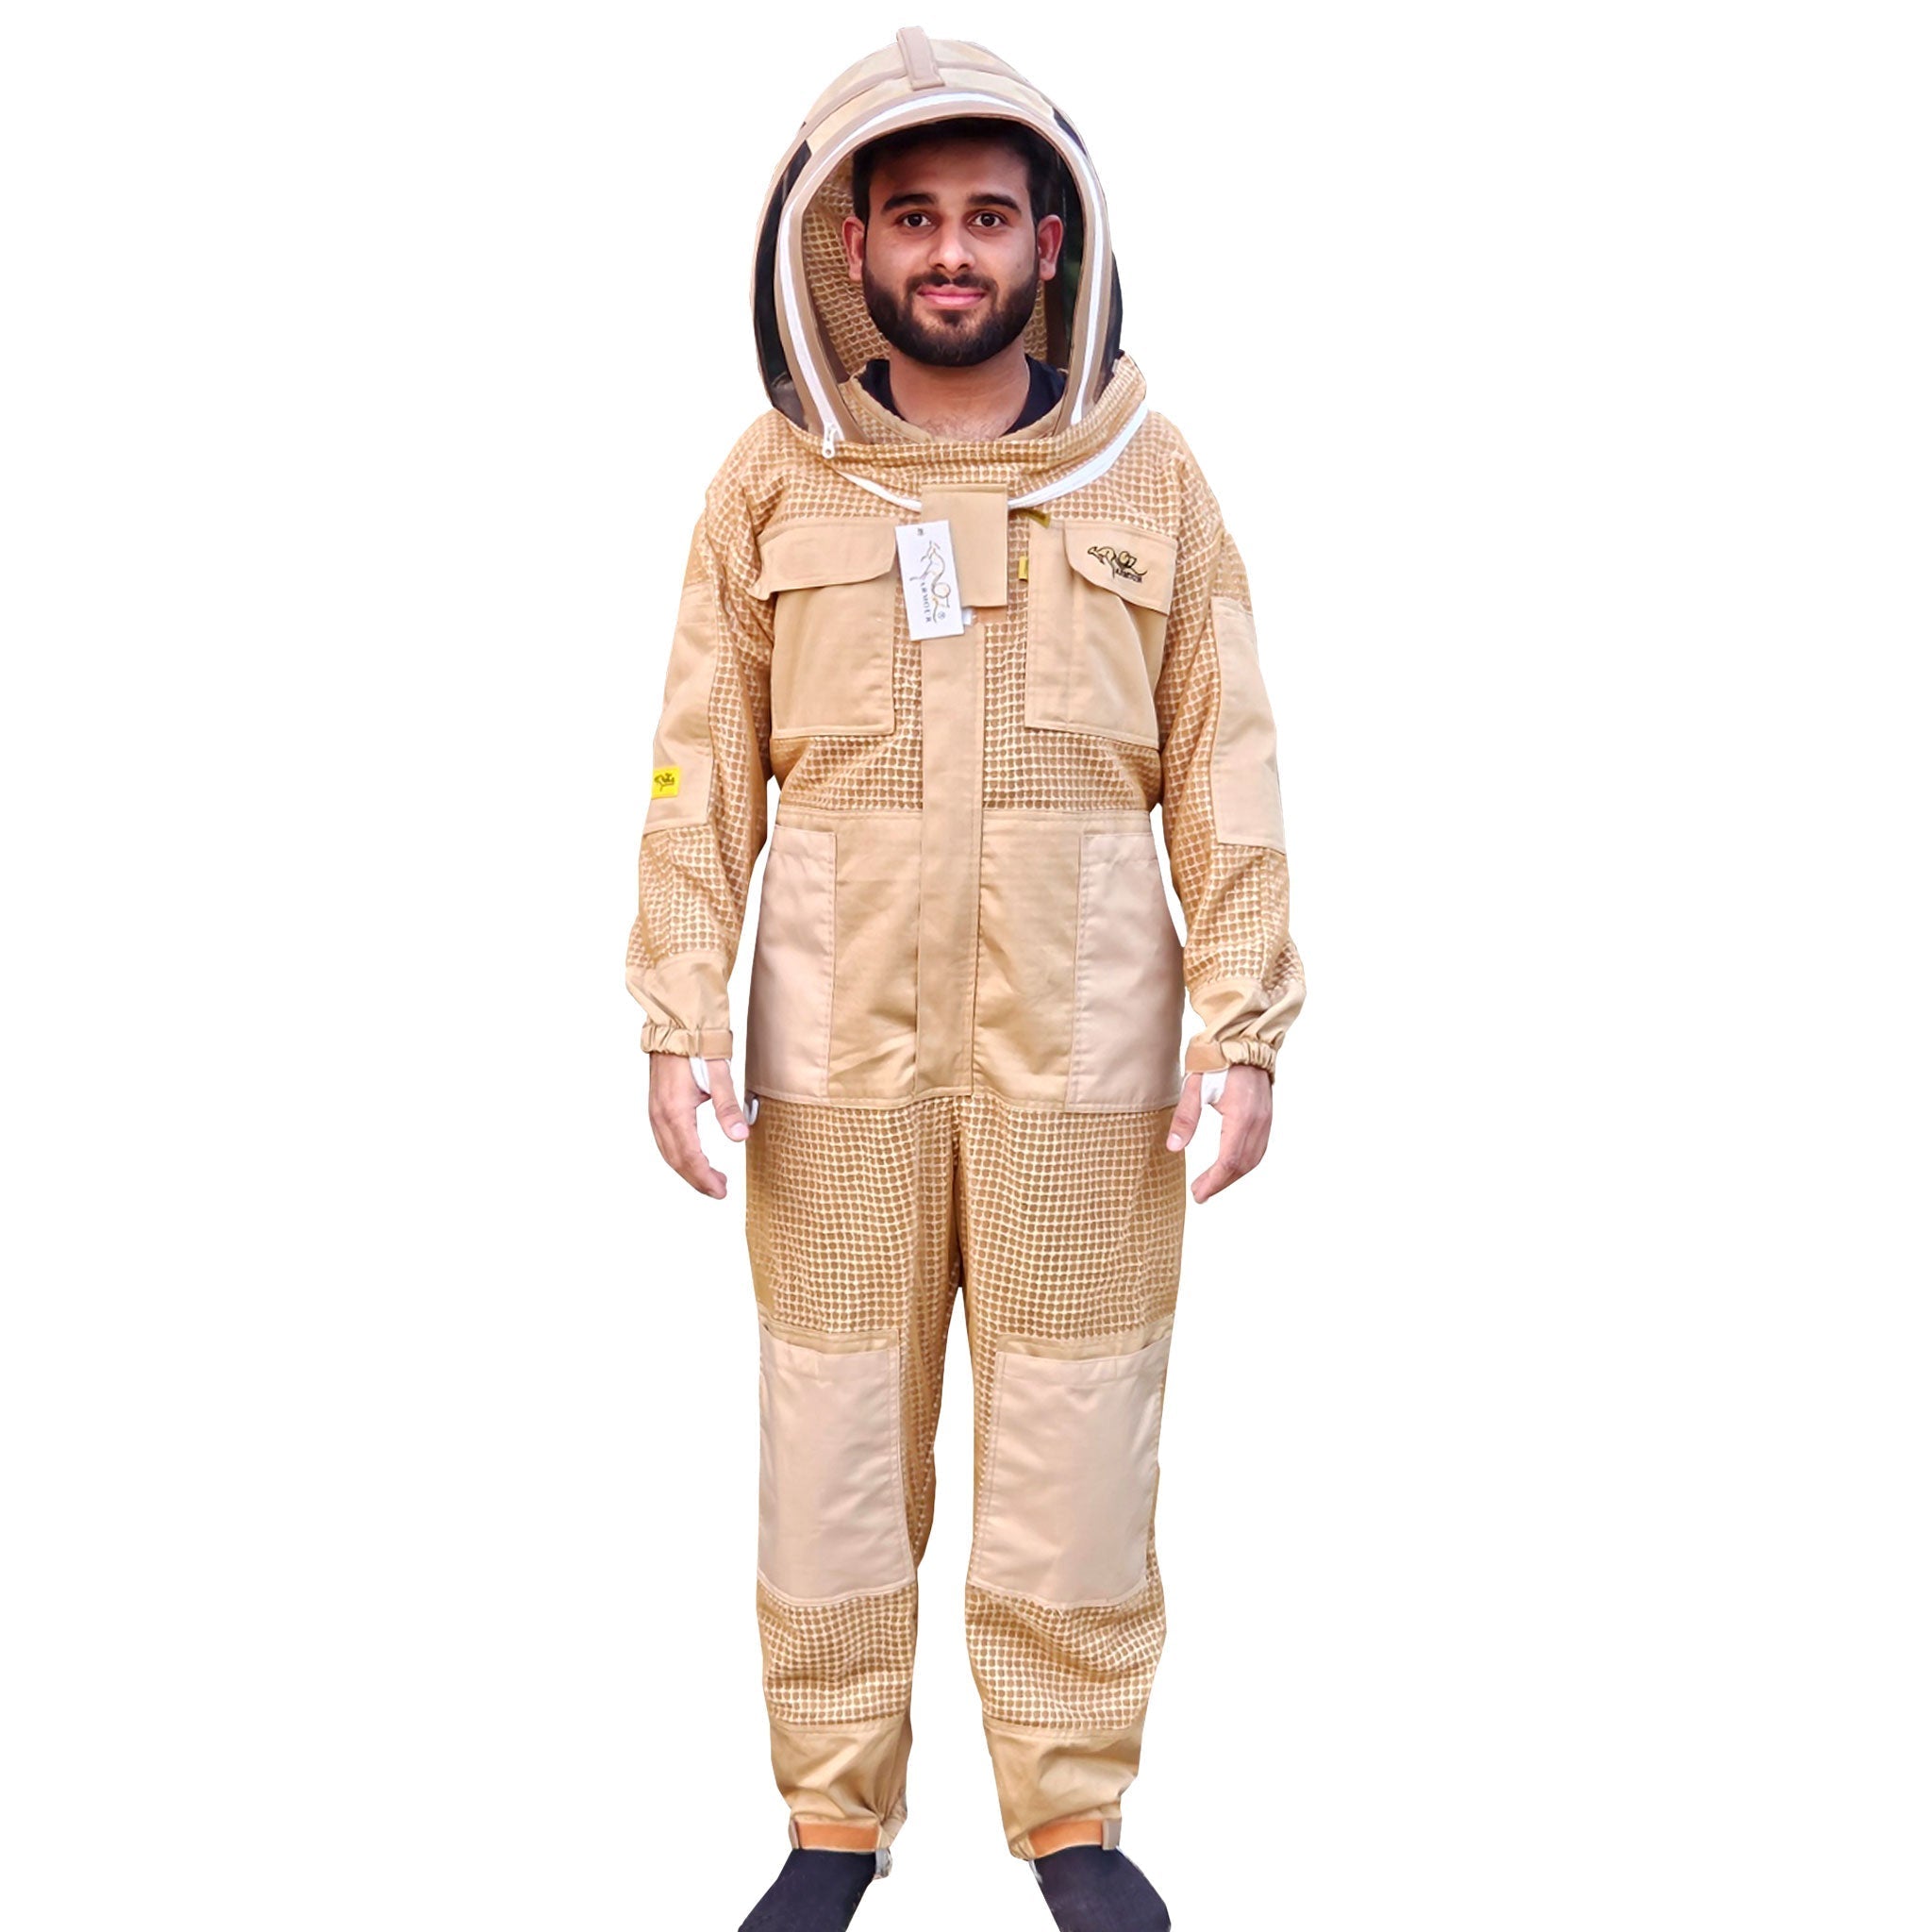 Khaki OZ ARMOUR beekeeping suit with 3 layer mesh and fencing veil for ventilation